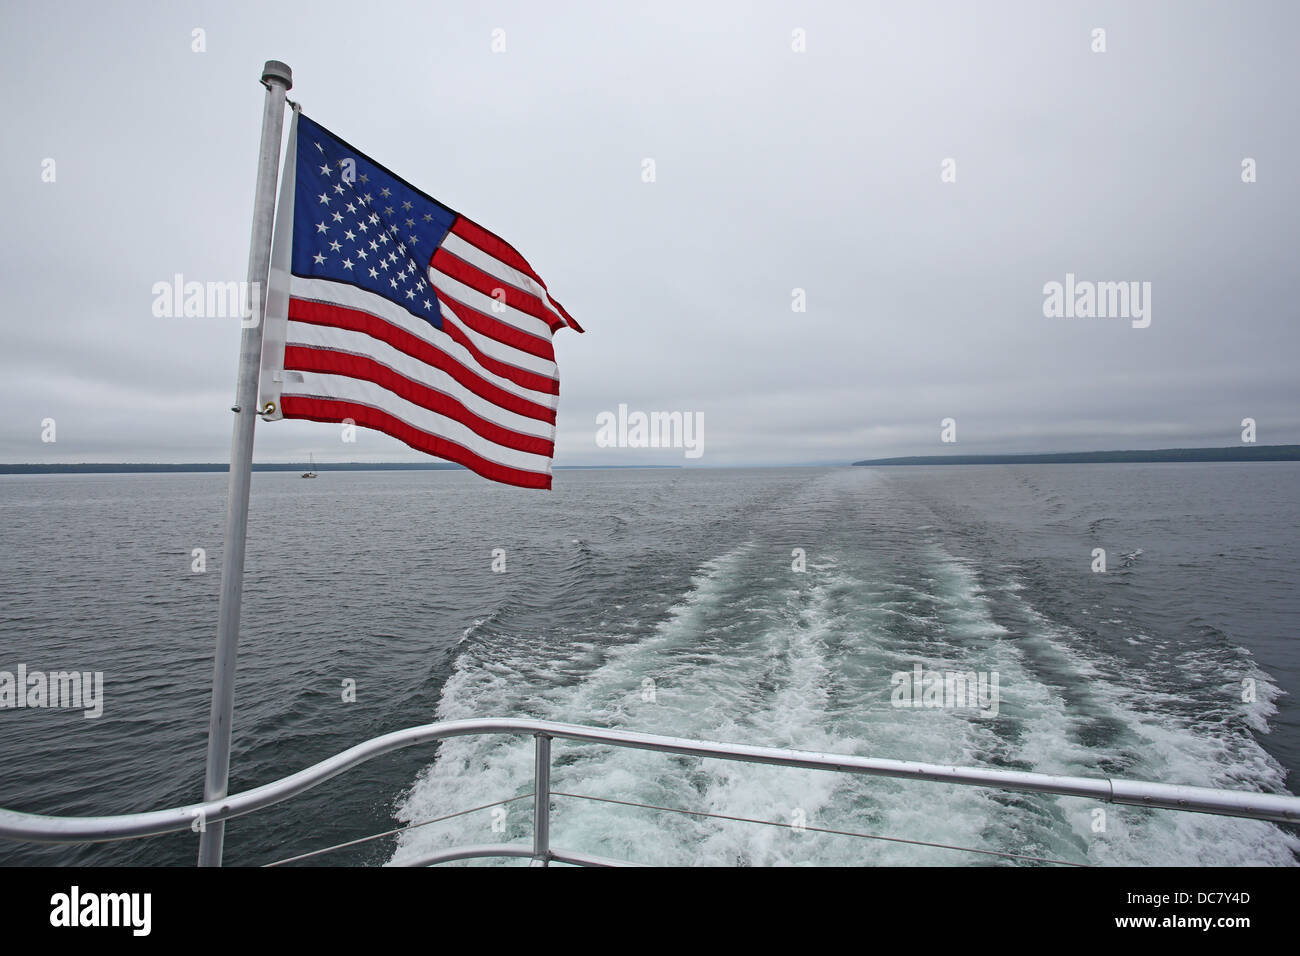 The back of a boat with a fluttering USA flag. Stock Photo